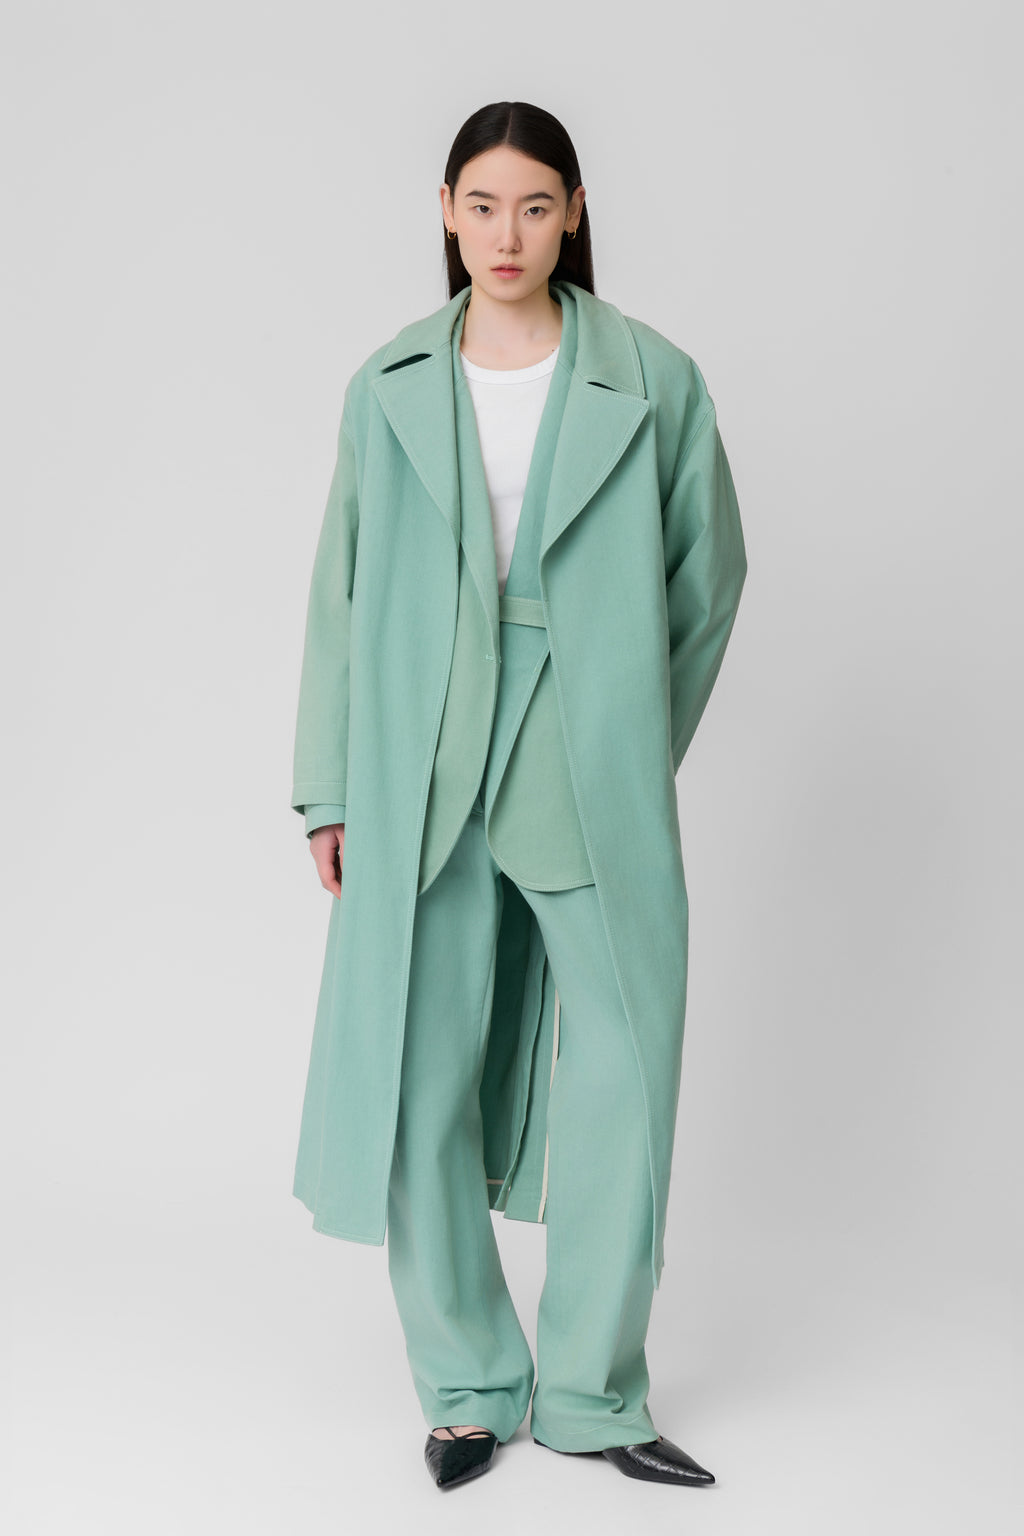 The Teal Jackie Denim Trench